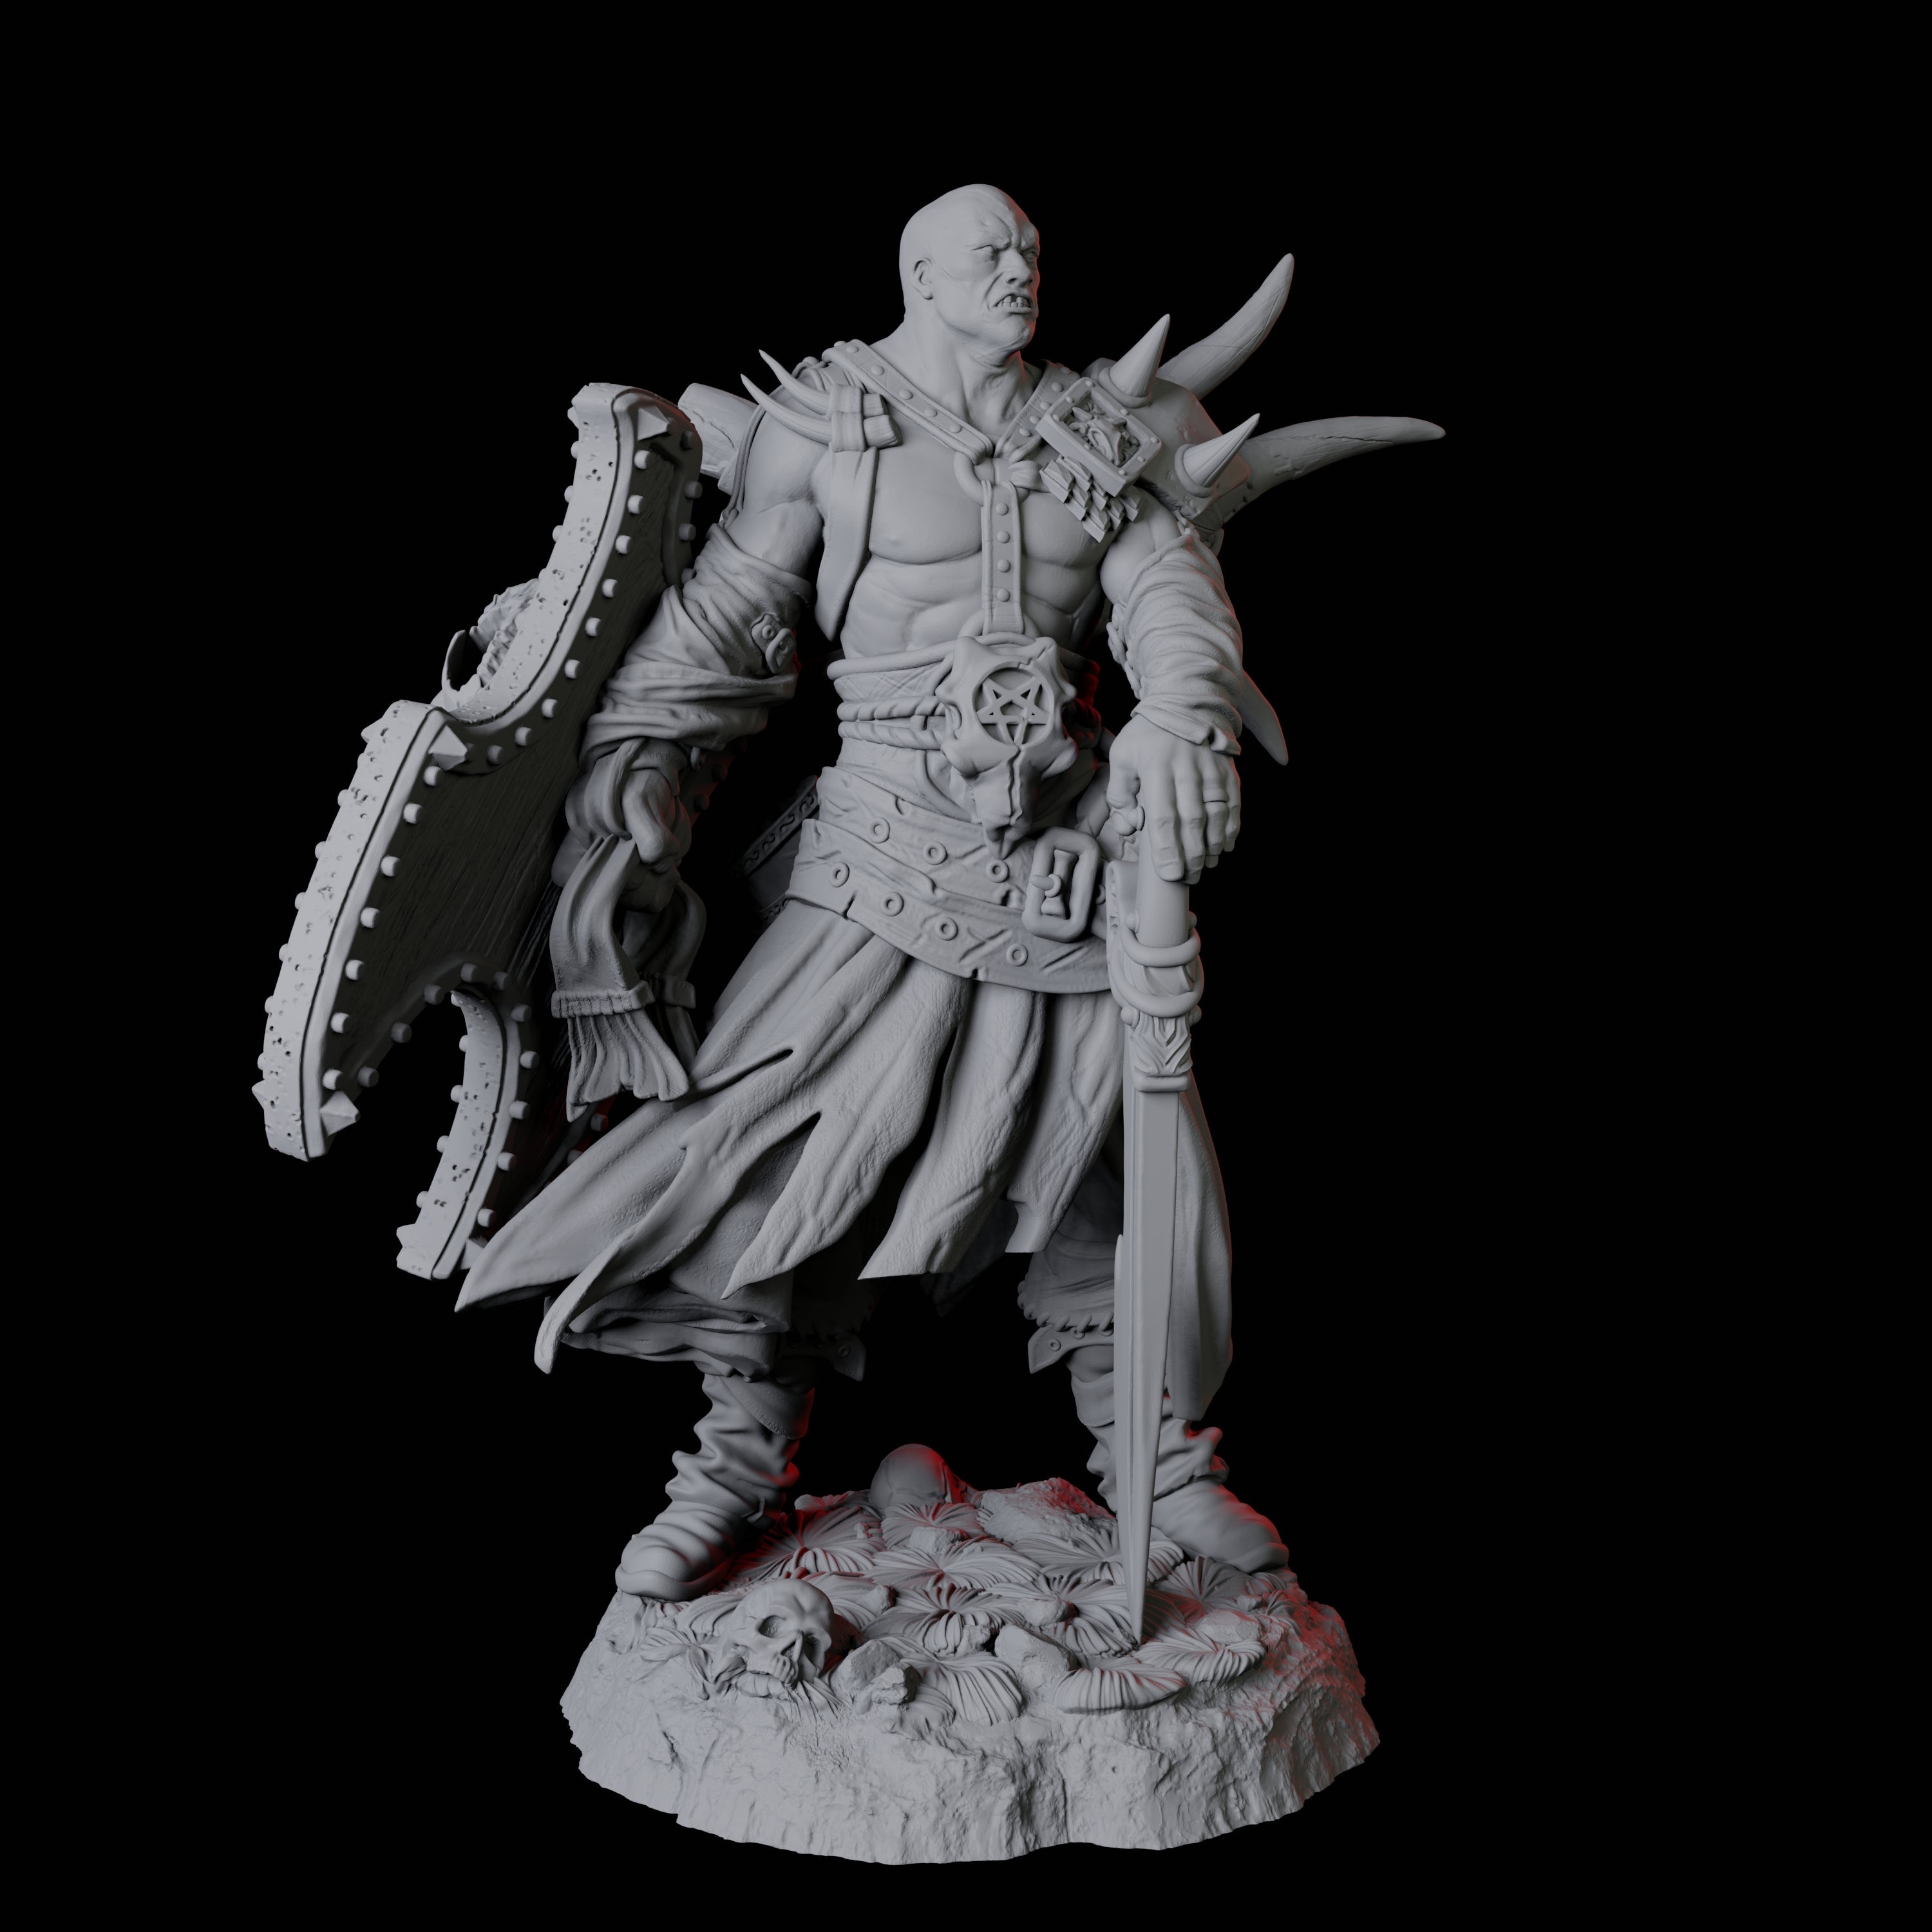 Calm Northman Barbarian Miniature for Dungeons and Dragons, Pathfinder or other TTRPGs